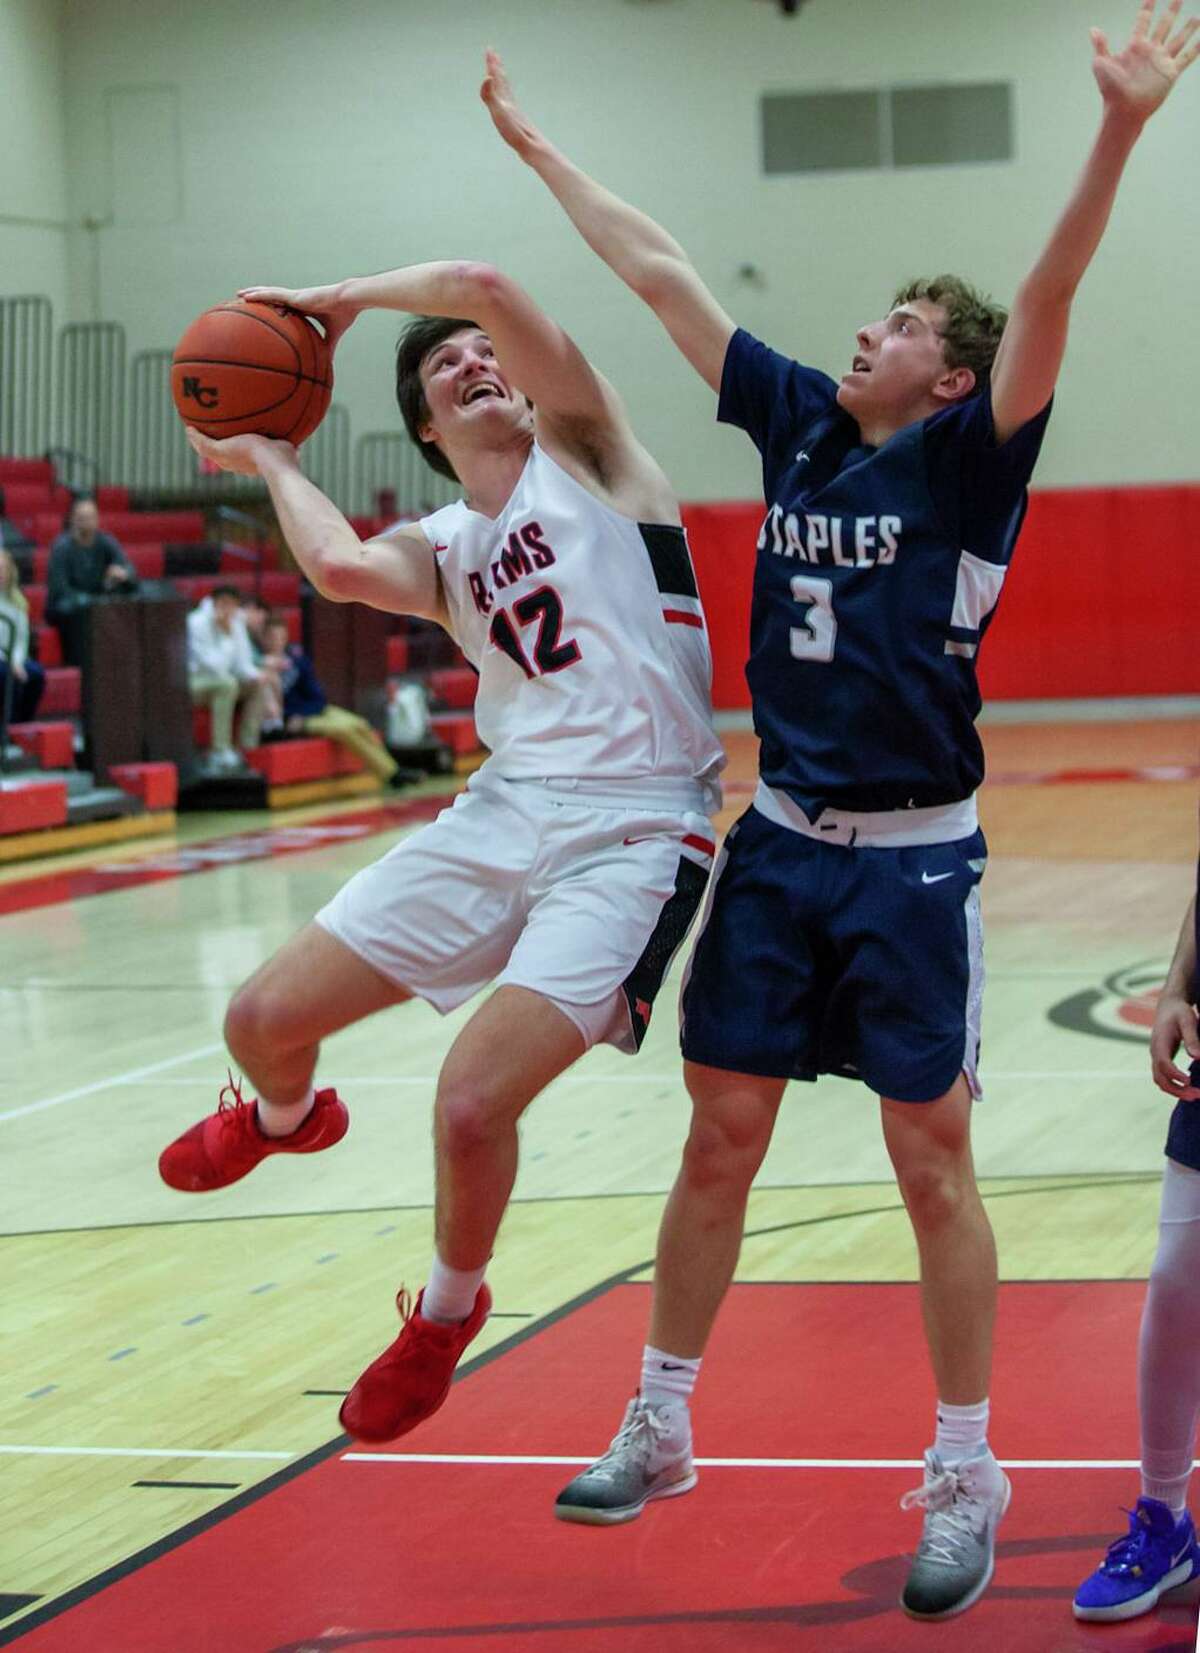 New Canaan’s Christian Sweeney (12) goes up for a shot while Staples’ Derek Sale (3) defends during a boys basketball game last season at New Canaan High School.